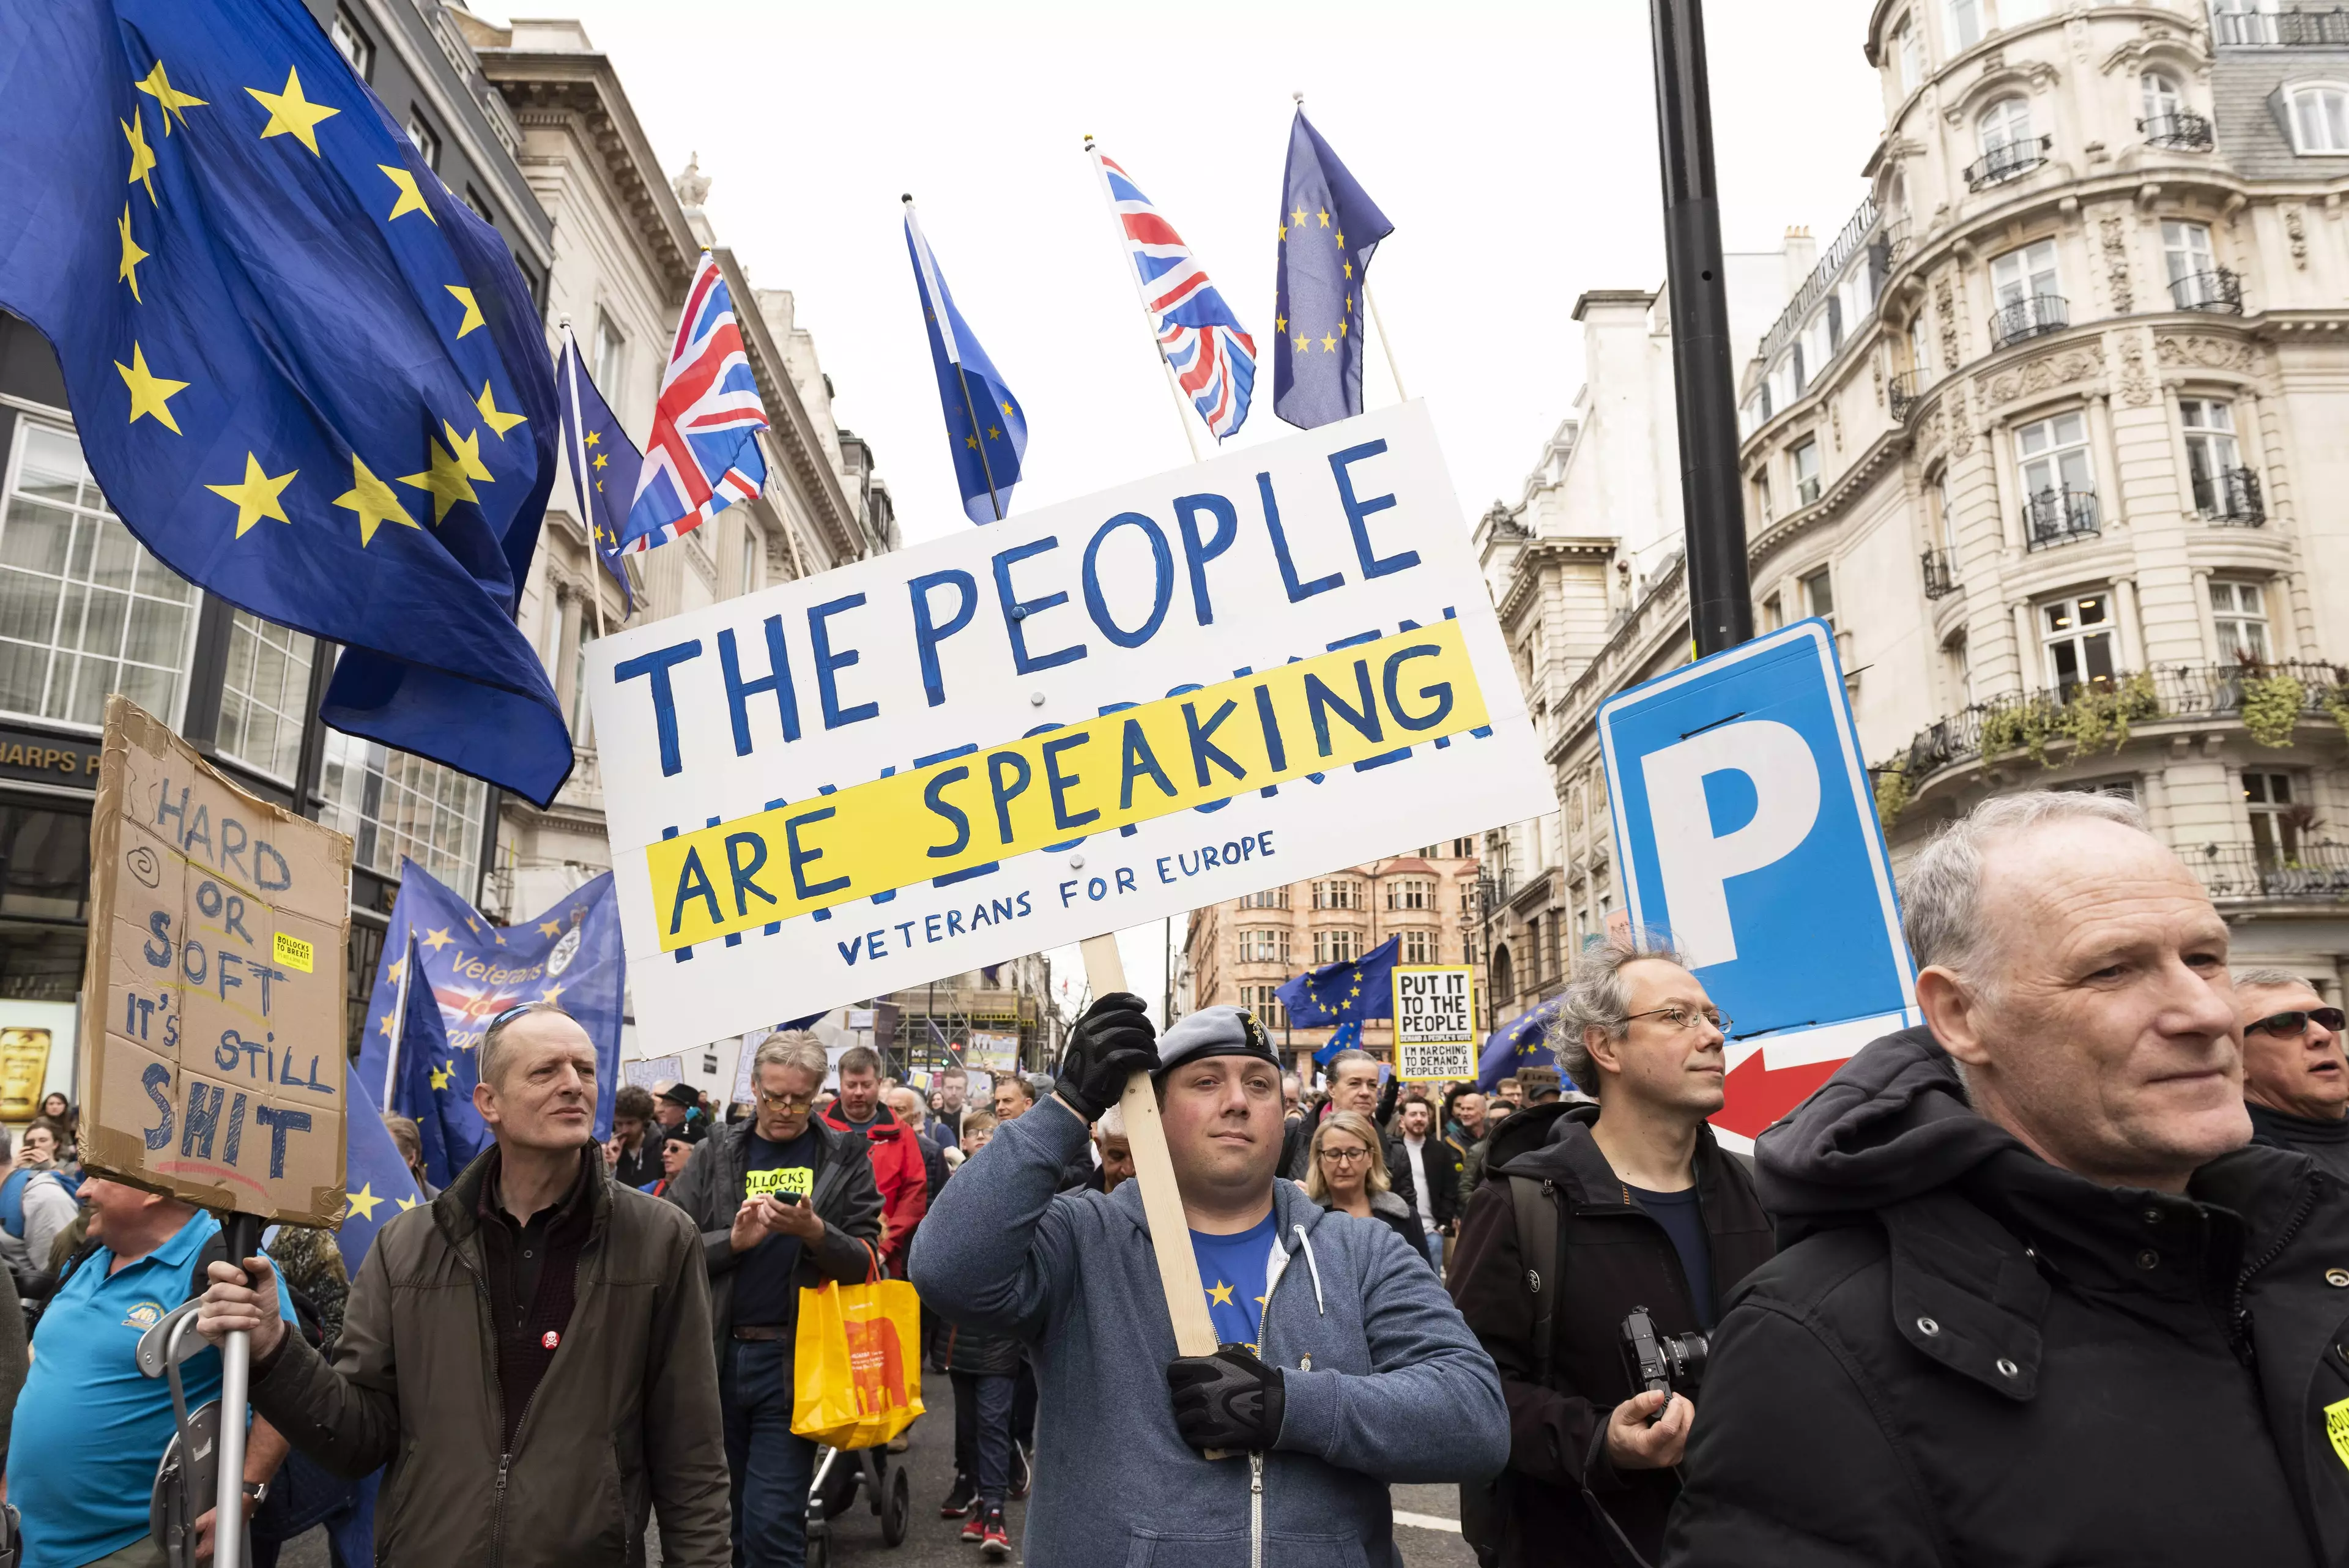 Around one million people marched on London over the weekend to demand a people's vote on Brexit.